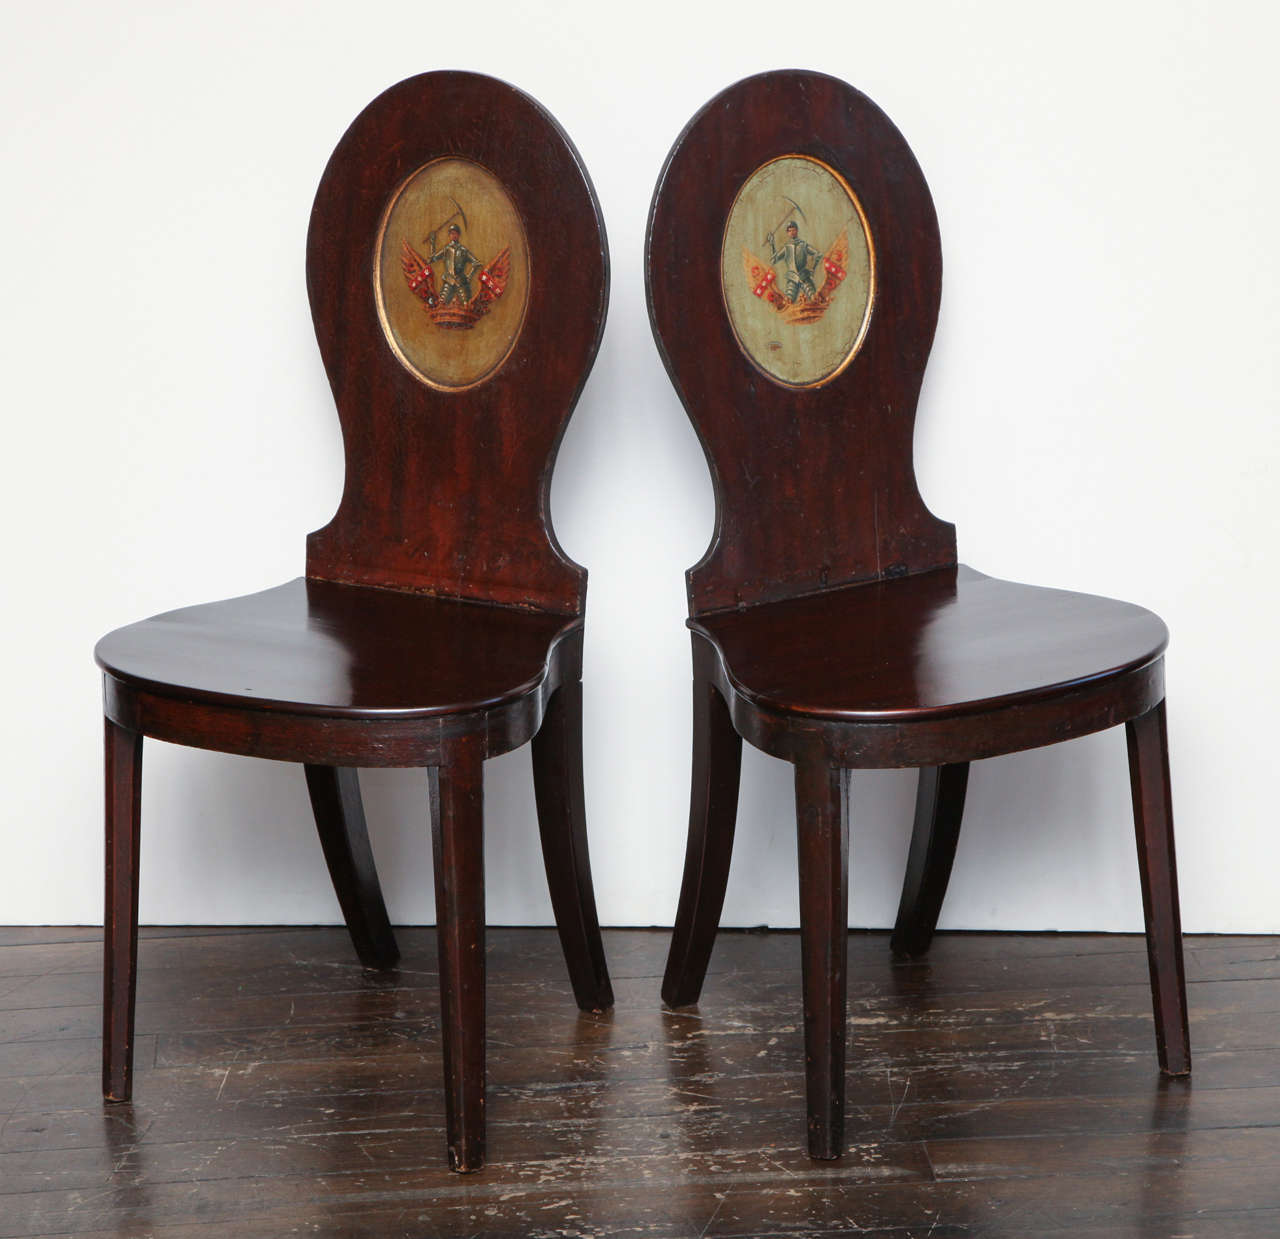 Pair of Early 19th Century, English Regency, Crested Hall Chairs in Mahogany